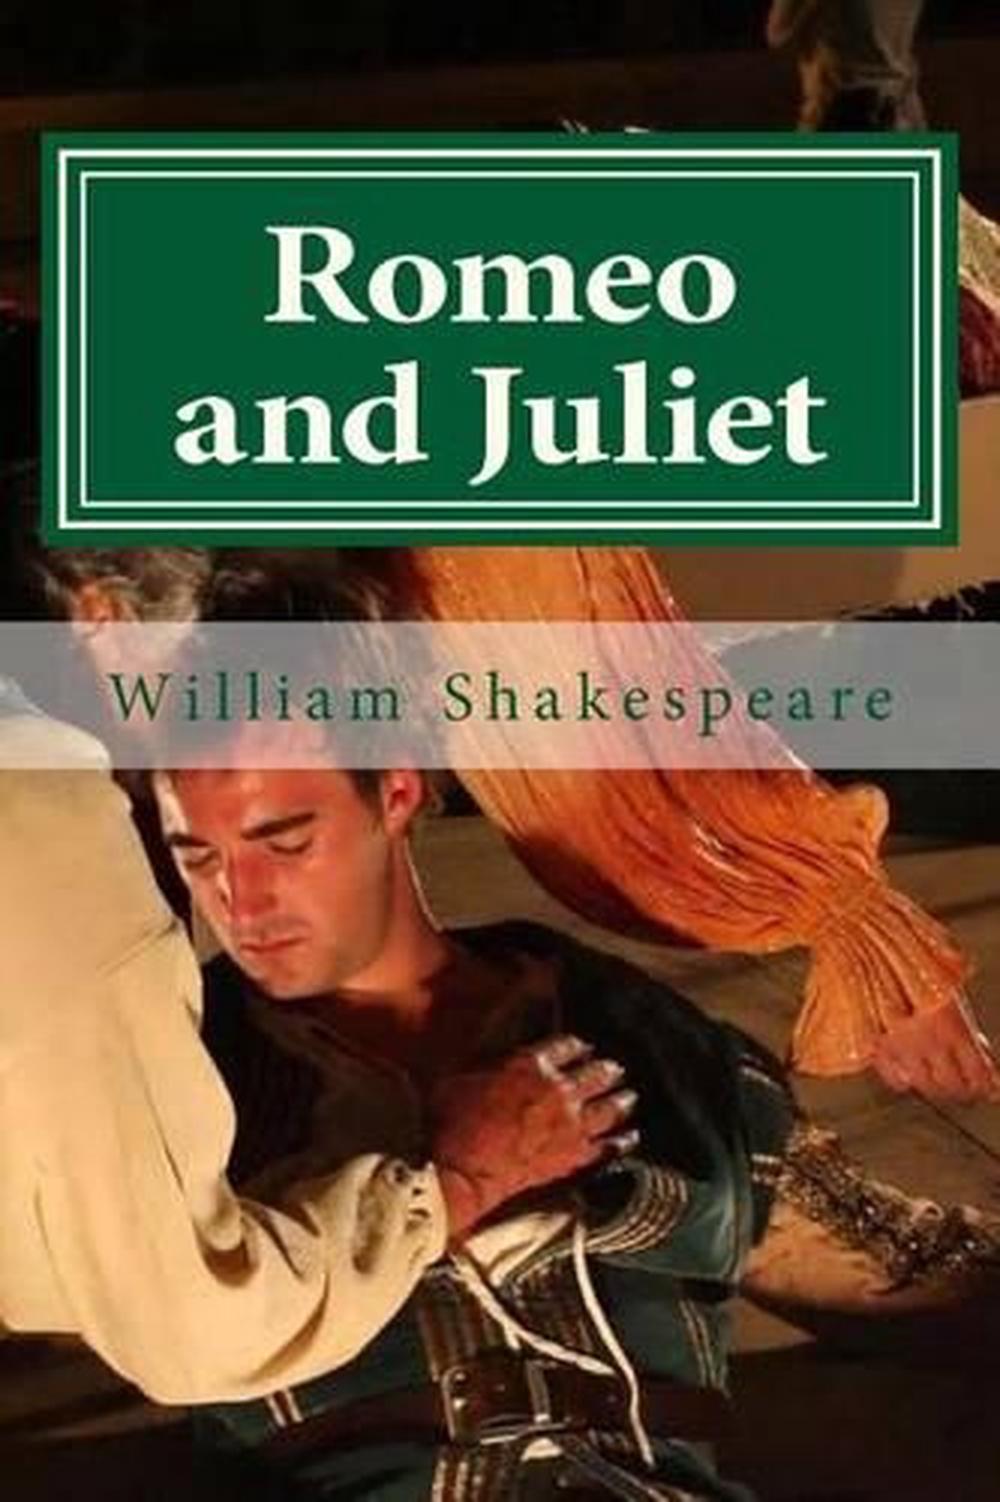 william shakespeare romeo and juliet book play script